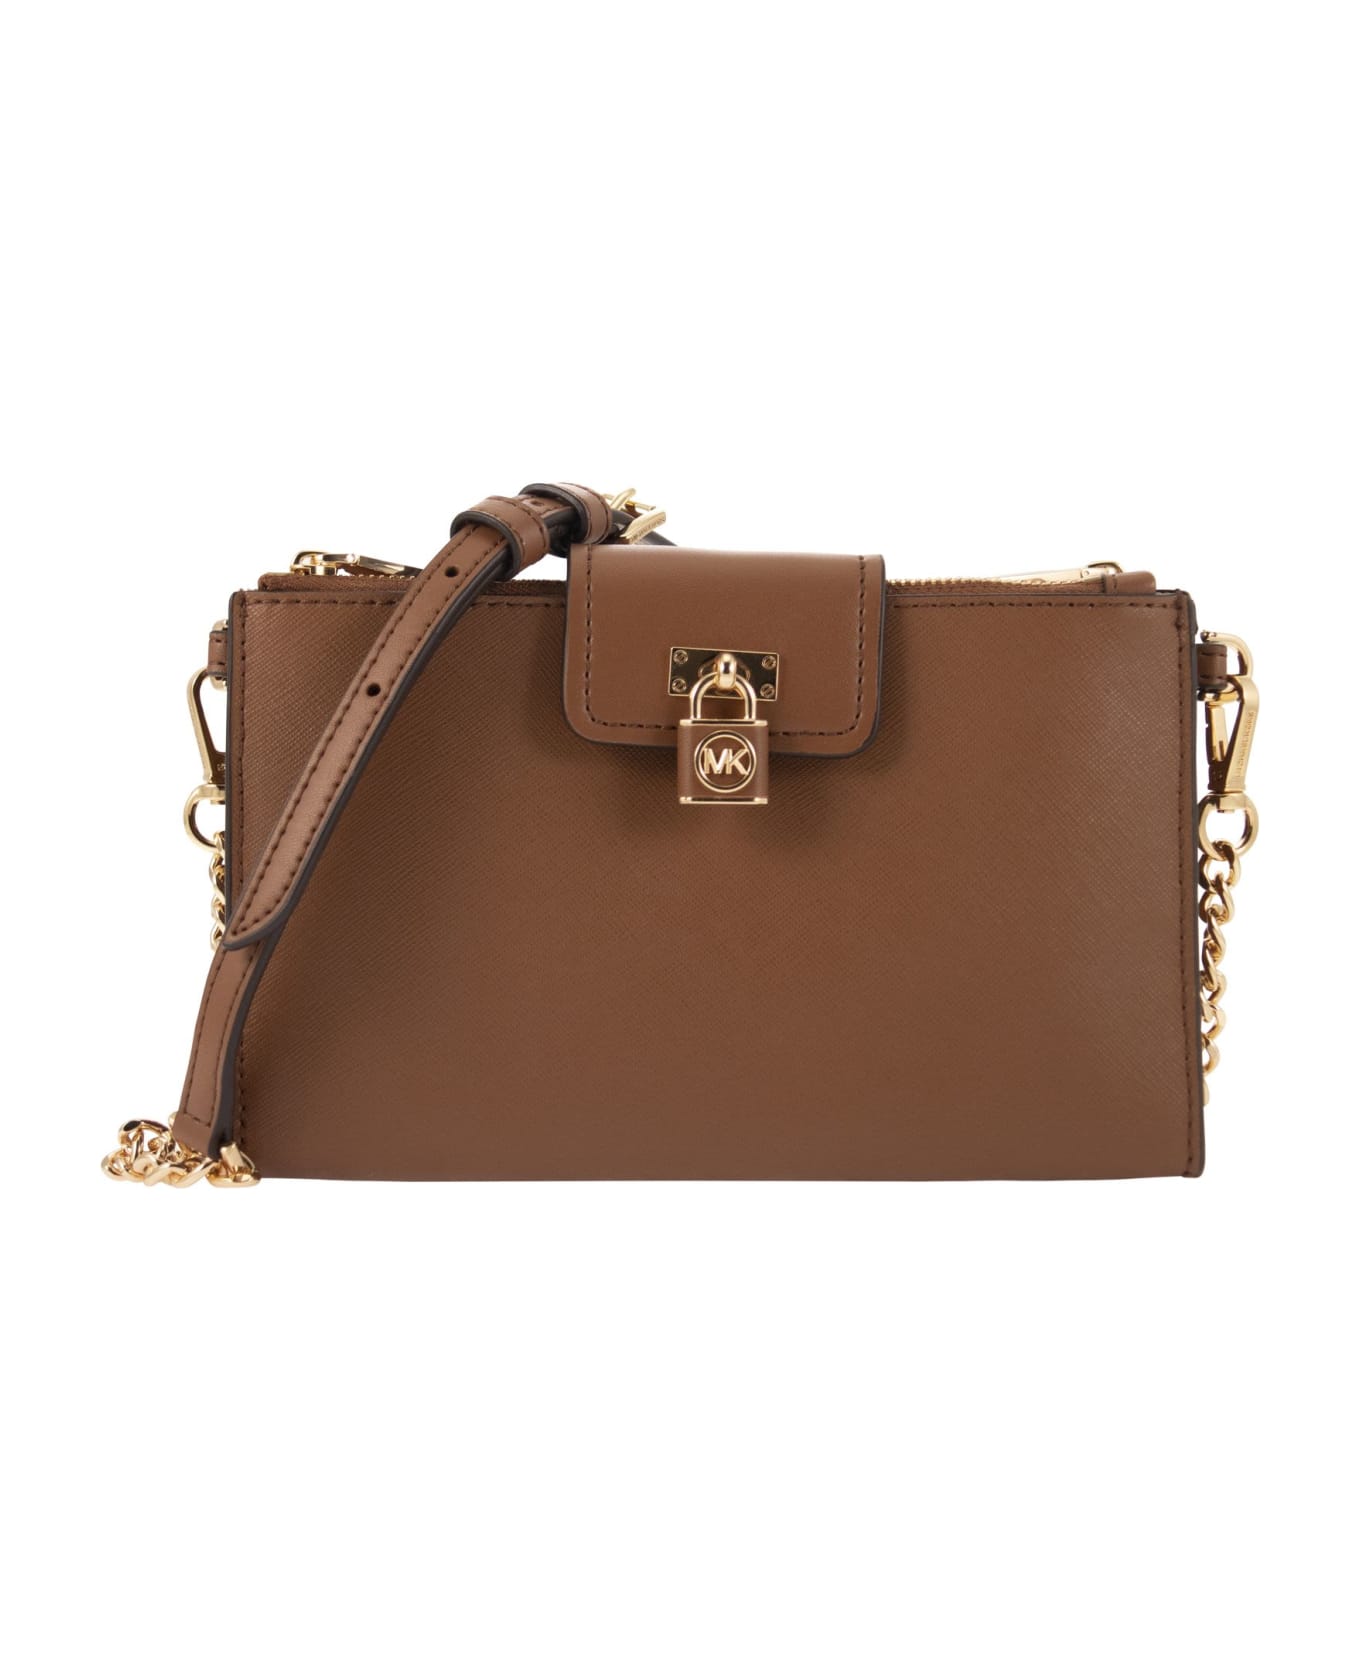 Michael Kors Ruby Bag In Saffiano Leather - Brown ショルダーバッグ